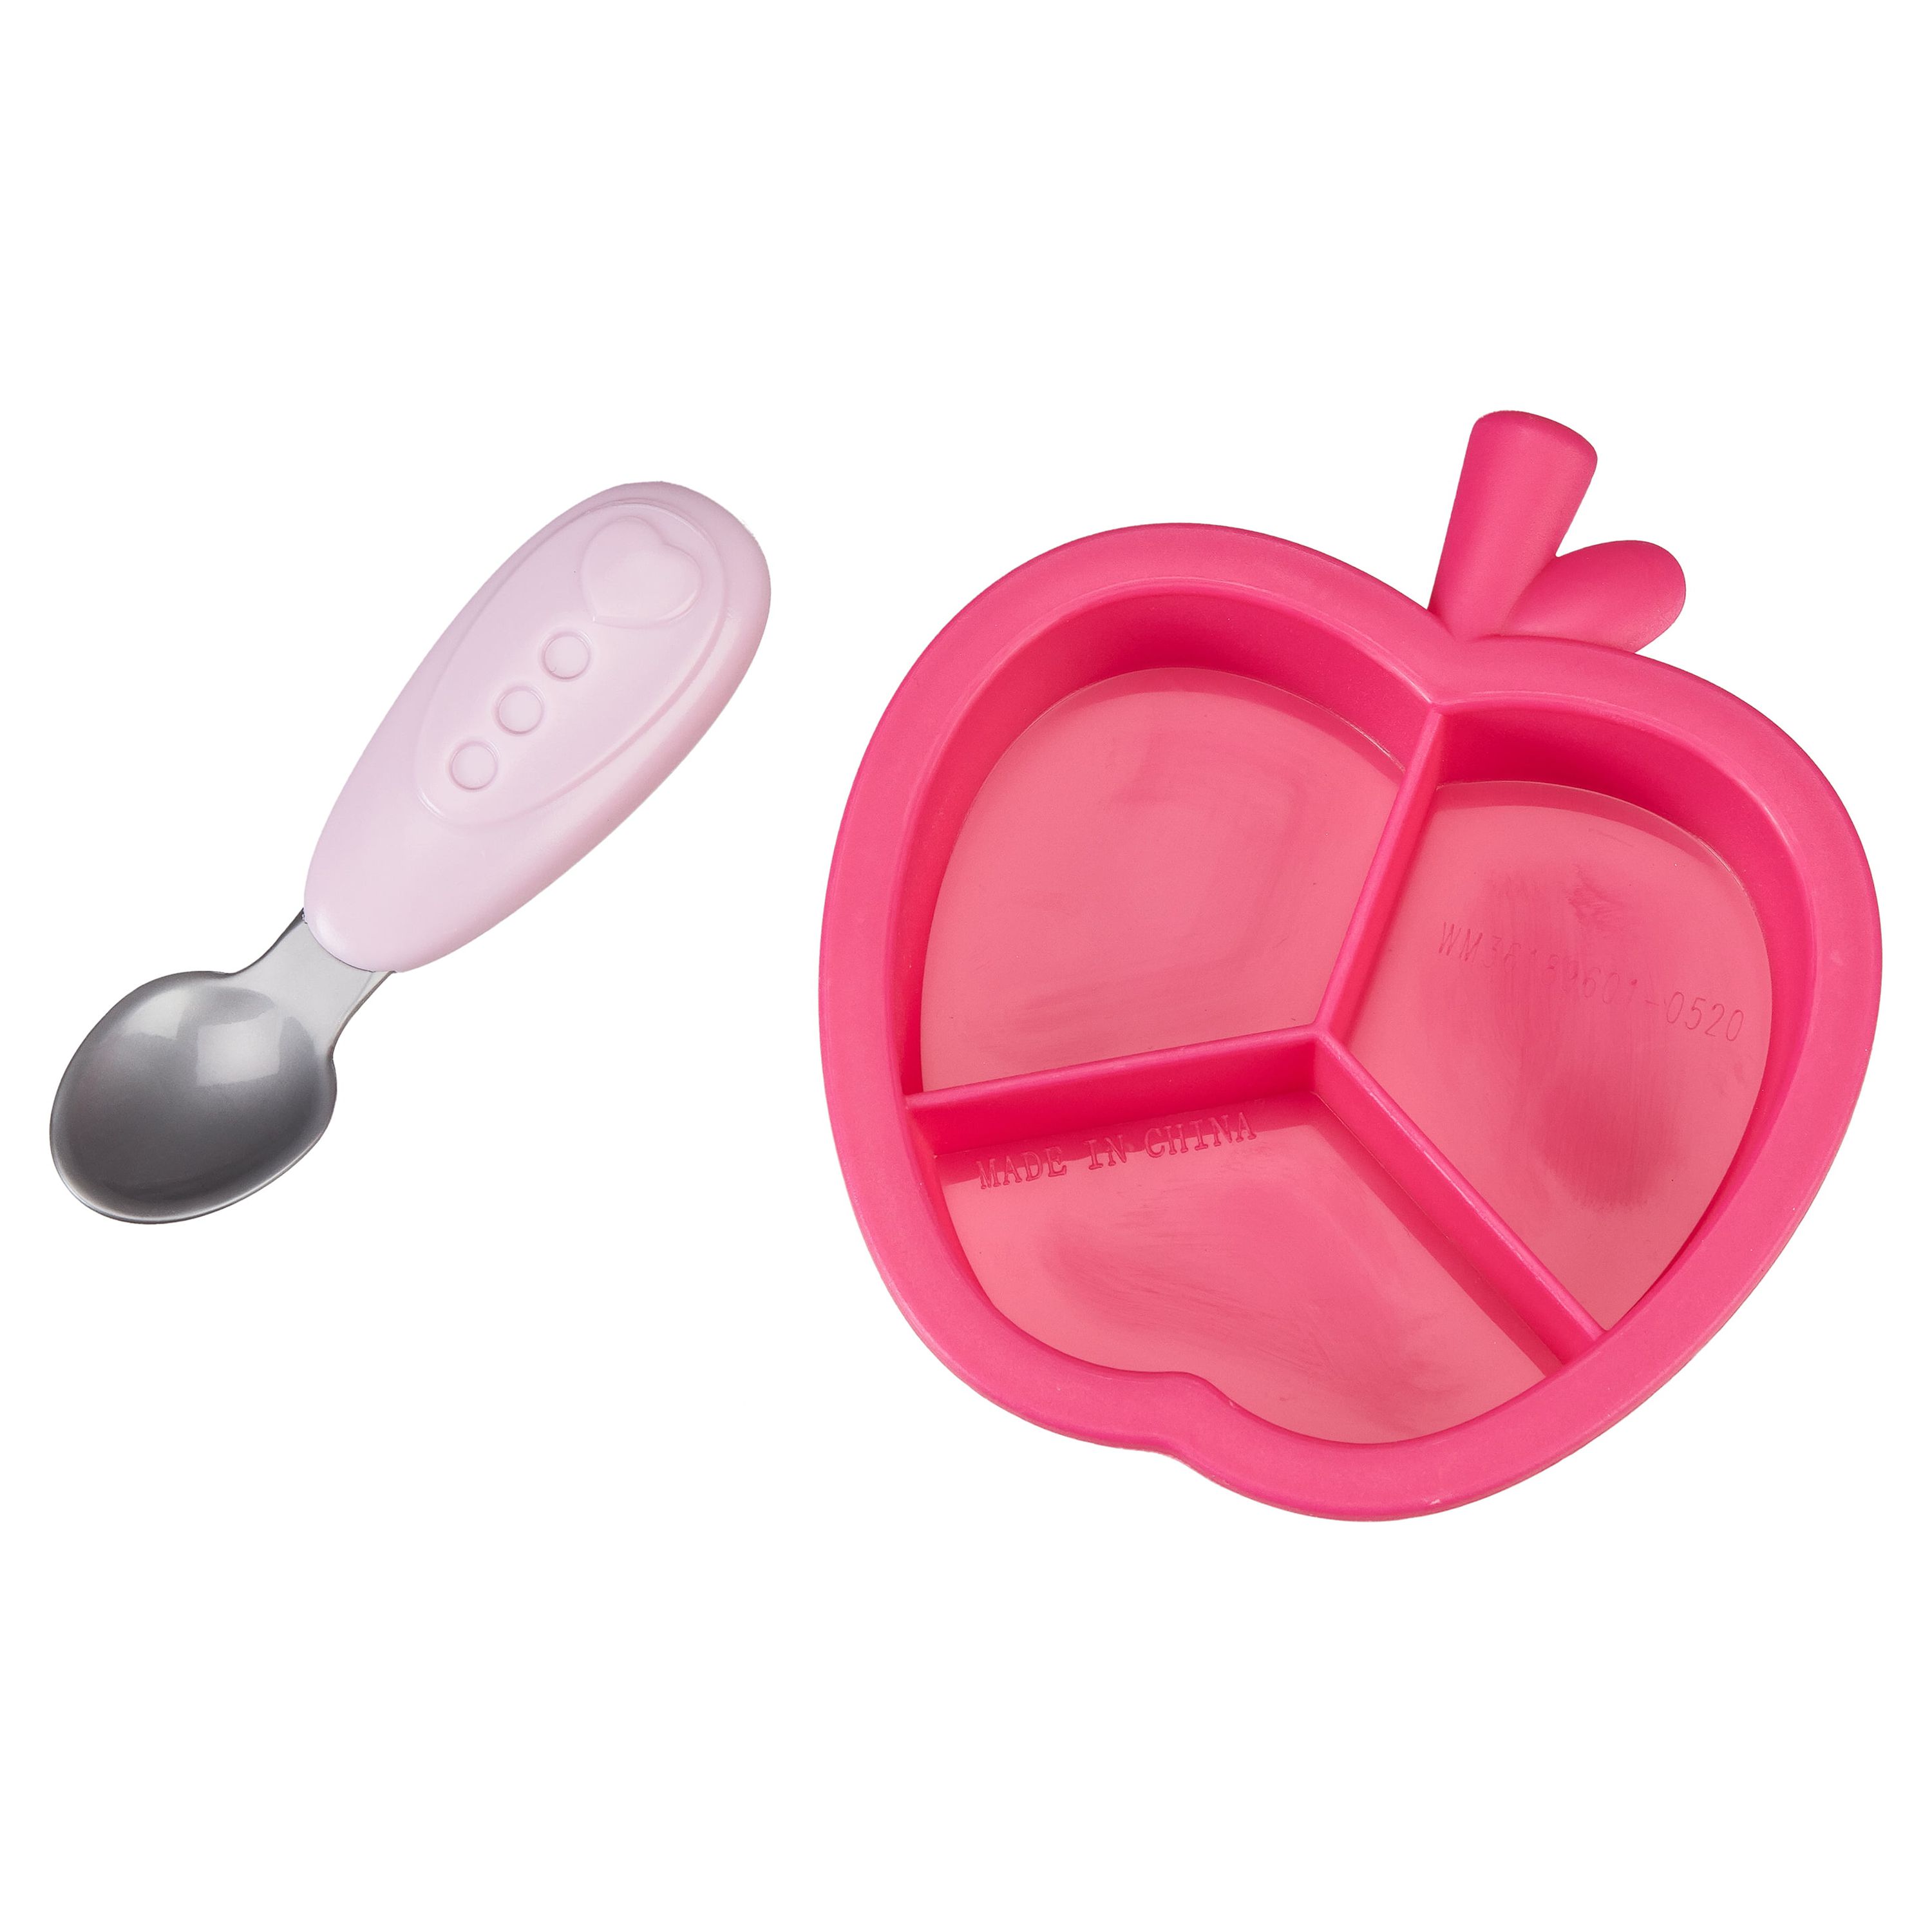 My Sweet Love Food Blender Toy Accessory Play Set, 9 Pieces - image 4 of 5